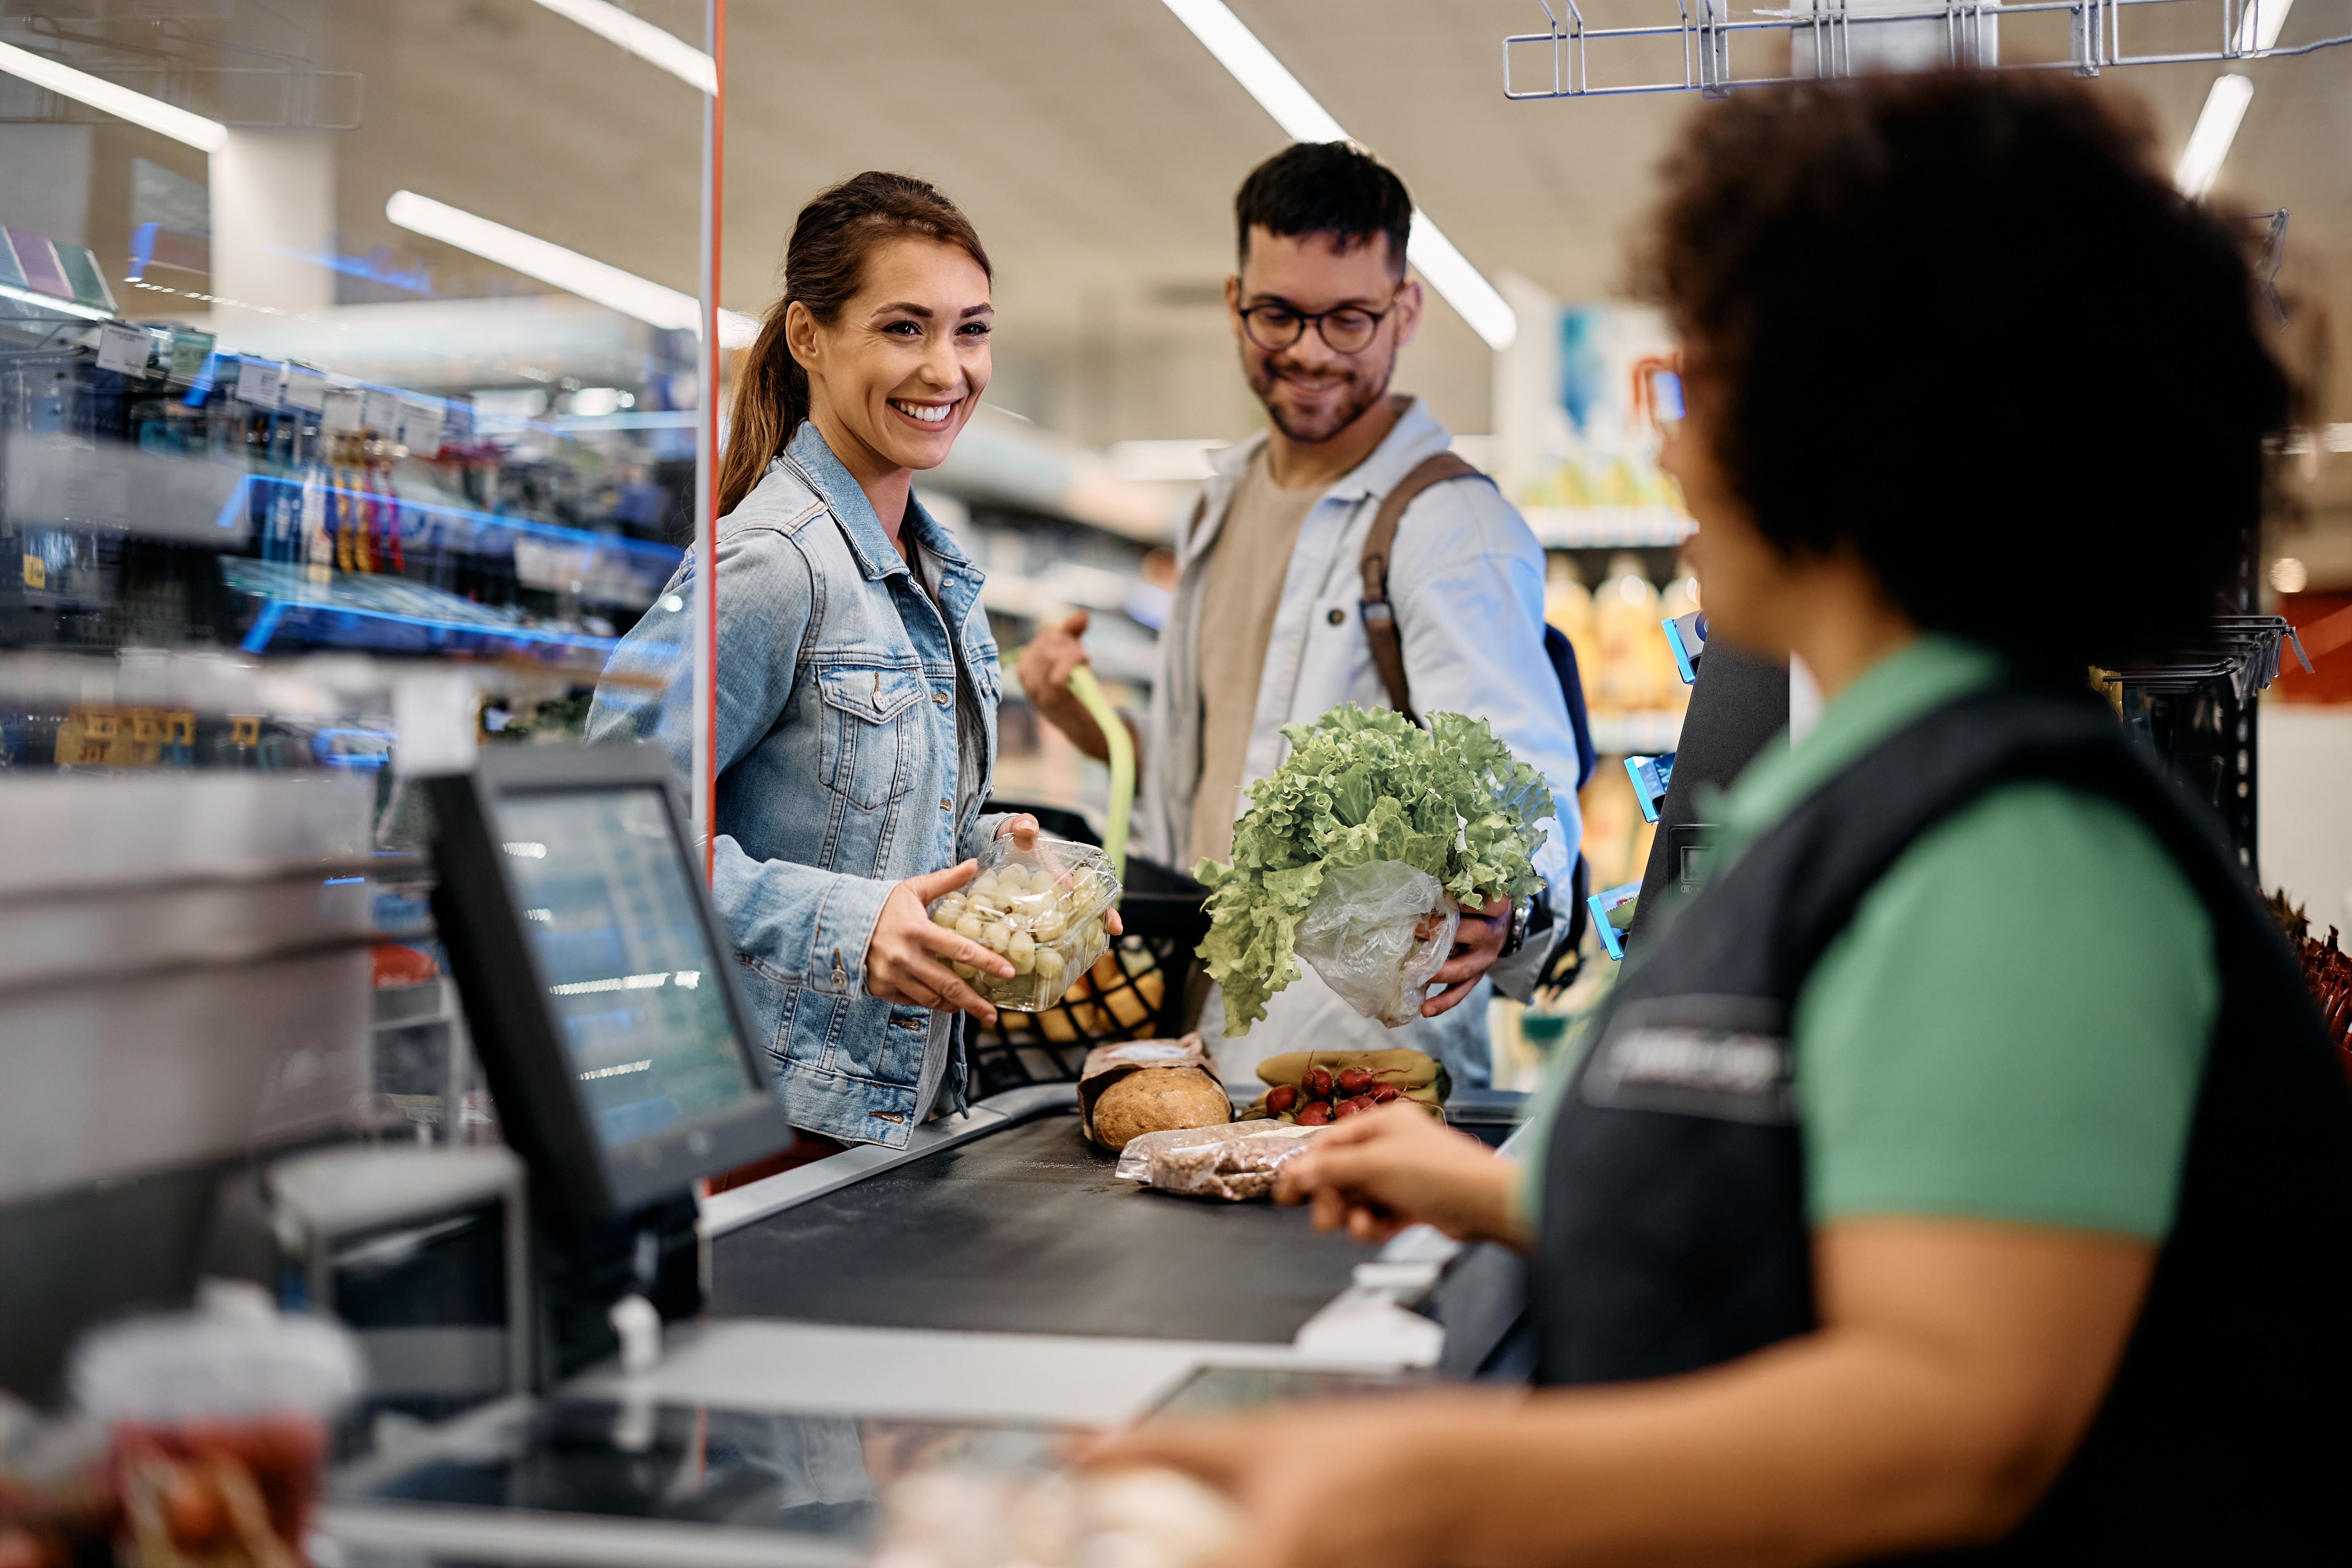 Customers greeting a cashier | Source: Shutterstock